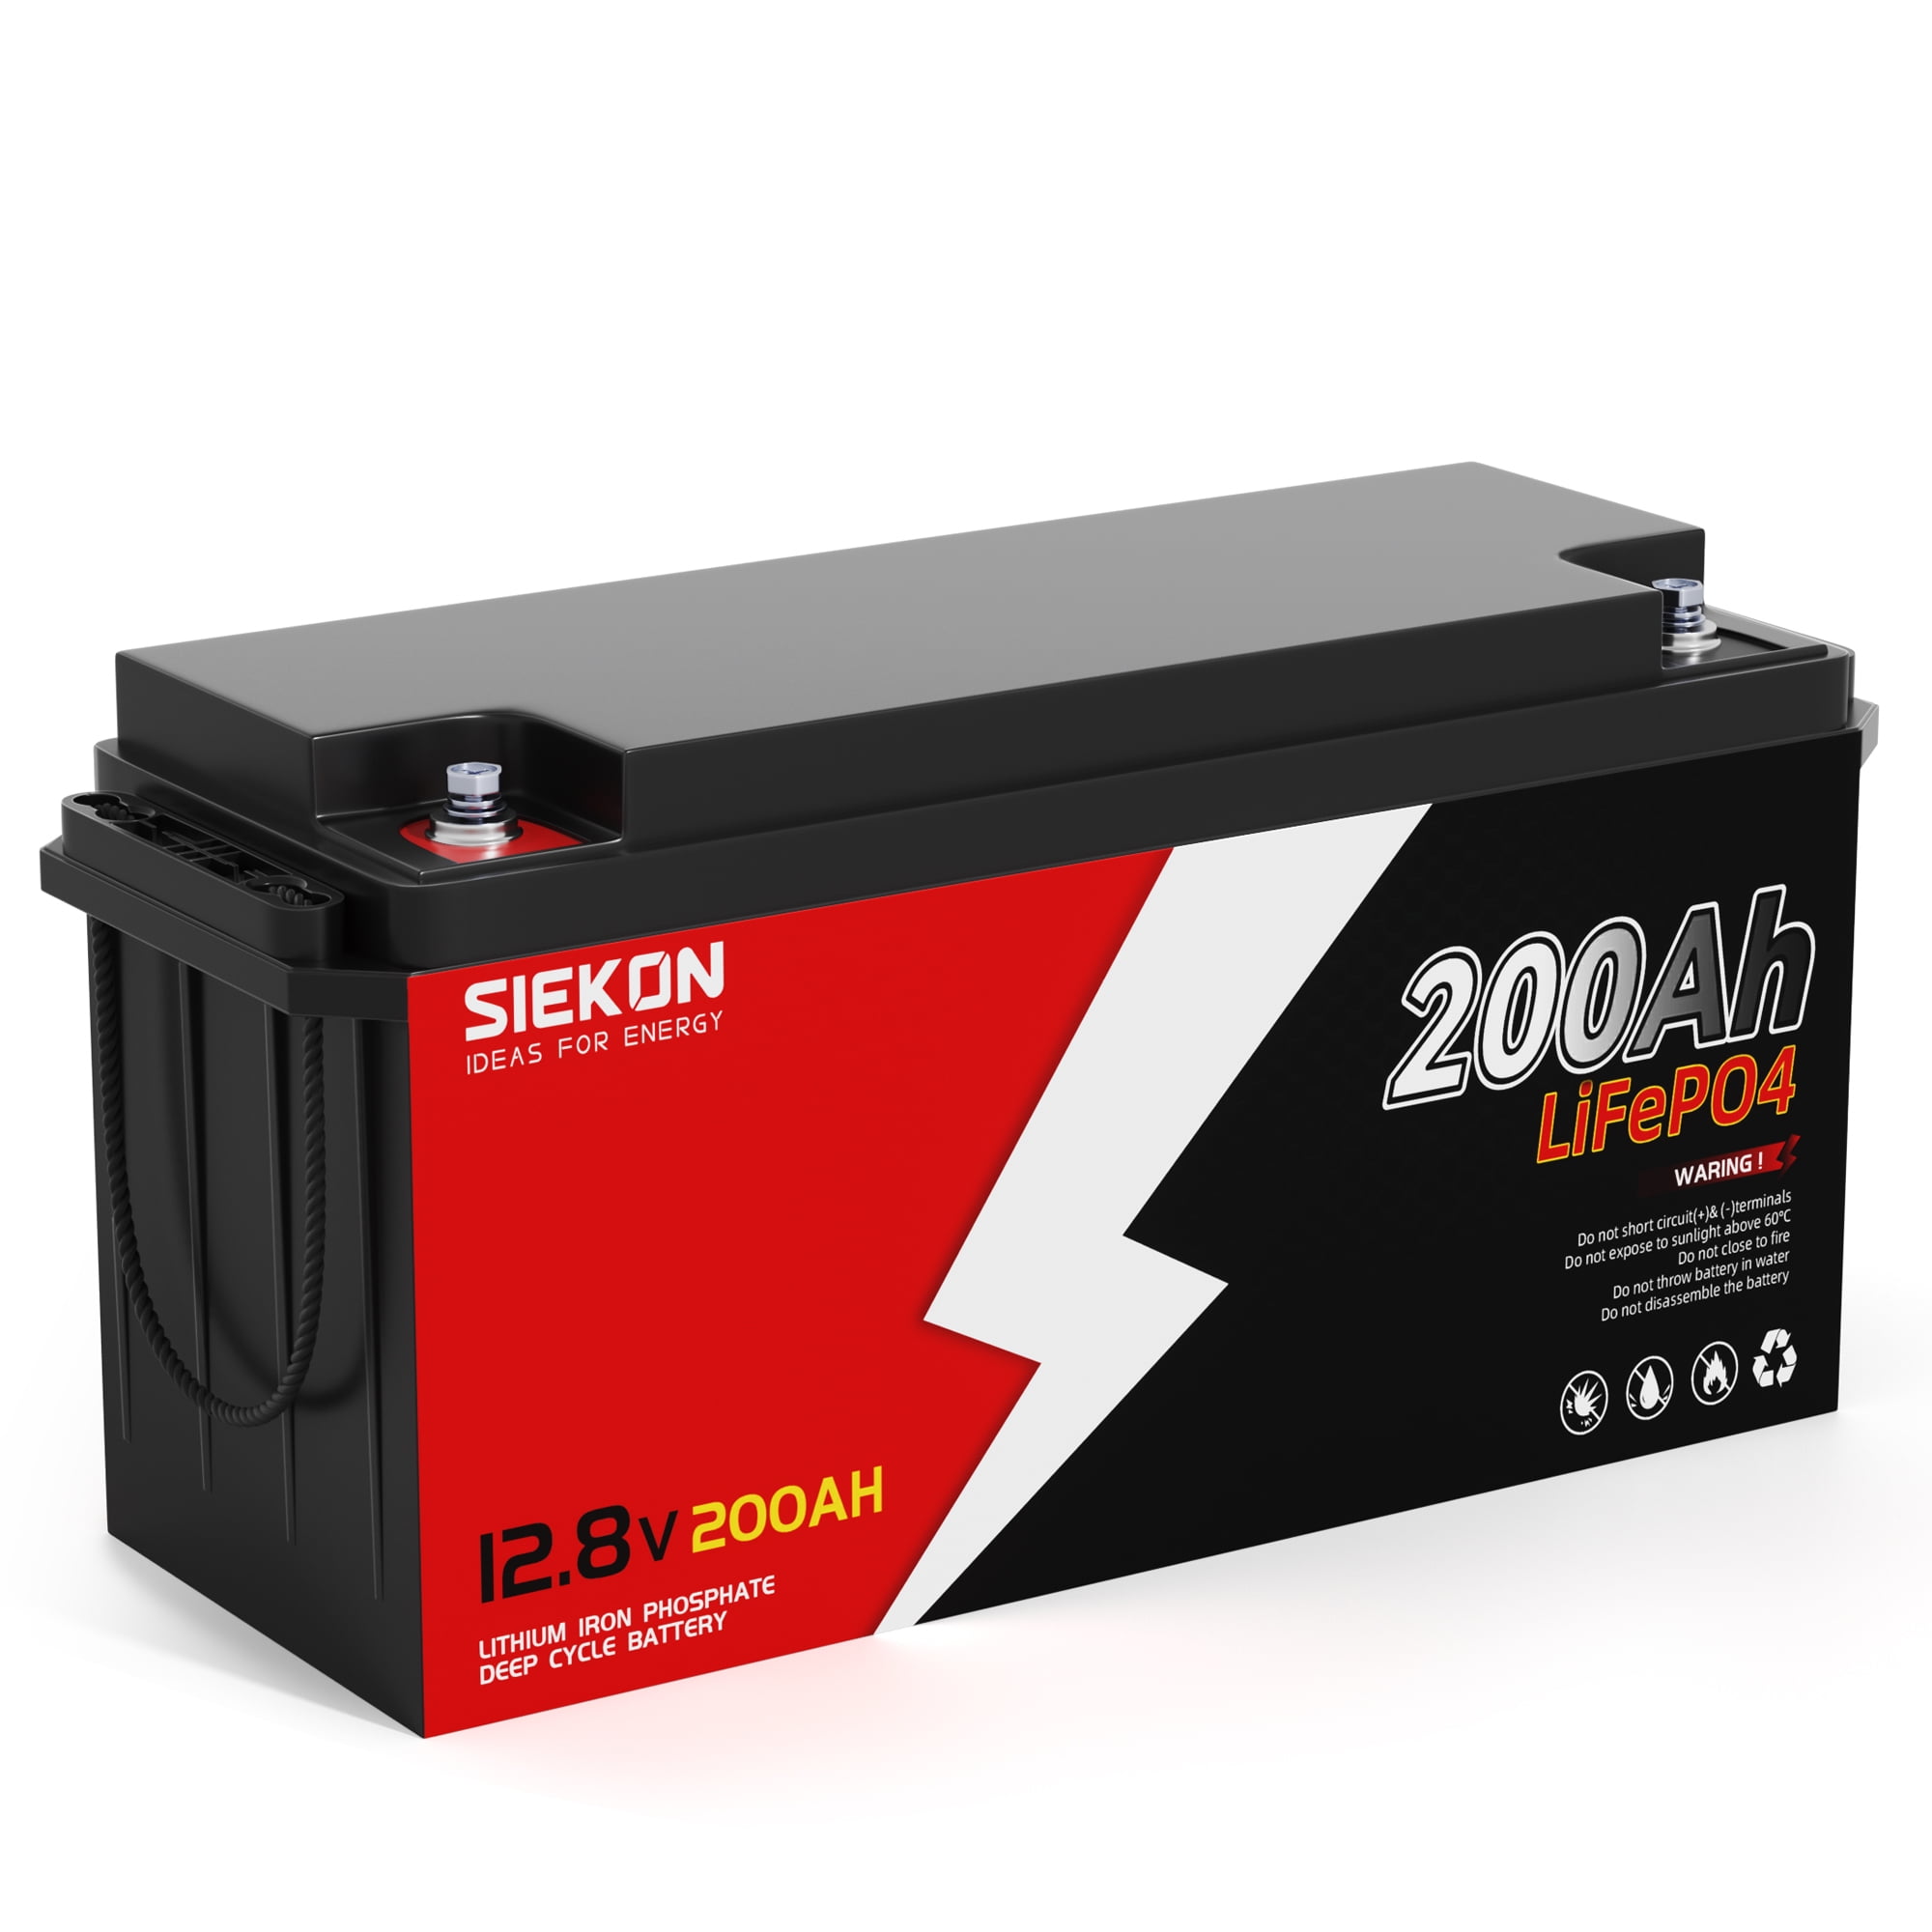 12V Lithium LiFePO4 Battery 3000+ Deep Cycles Smart BMS Perfect for Boat  Security Devices Camping Etc - AliExpress